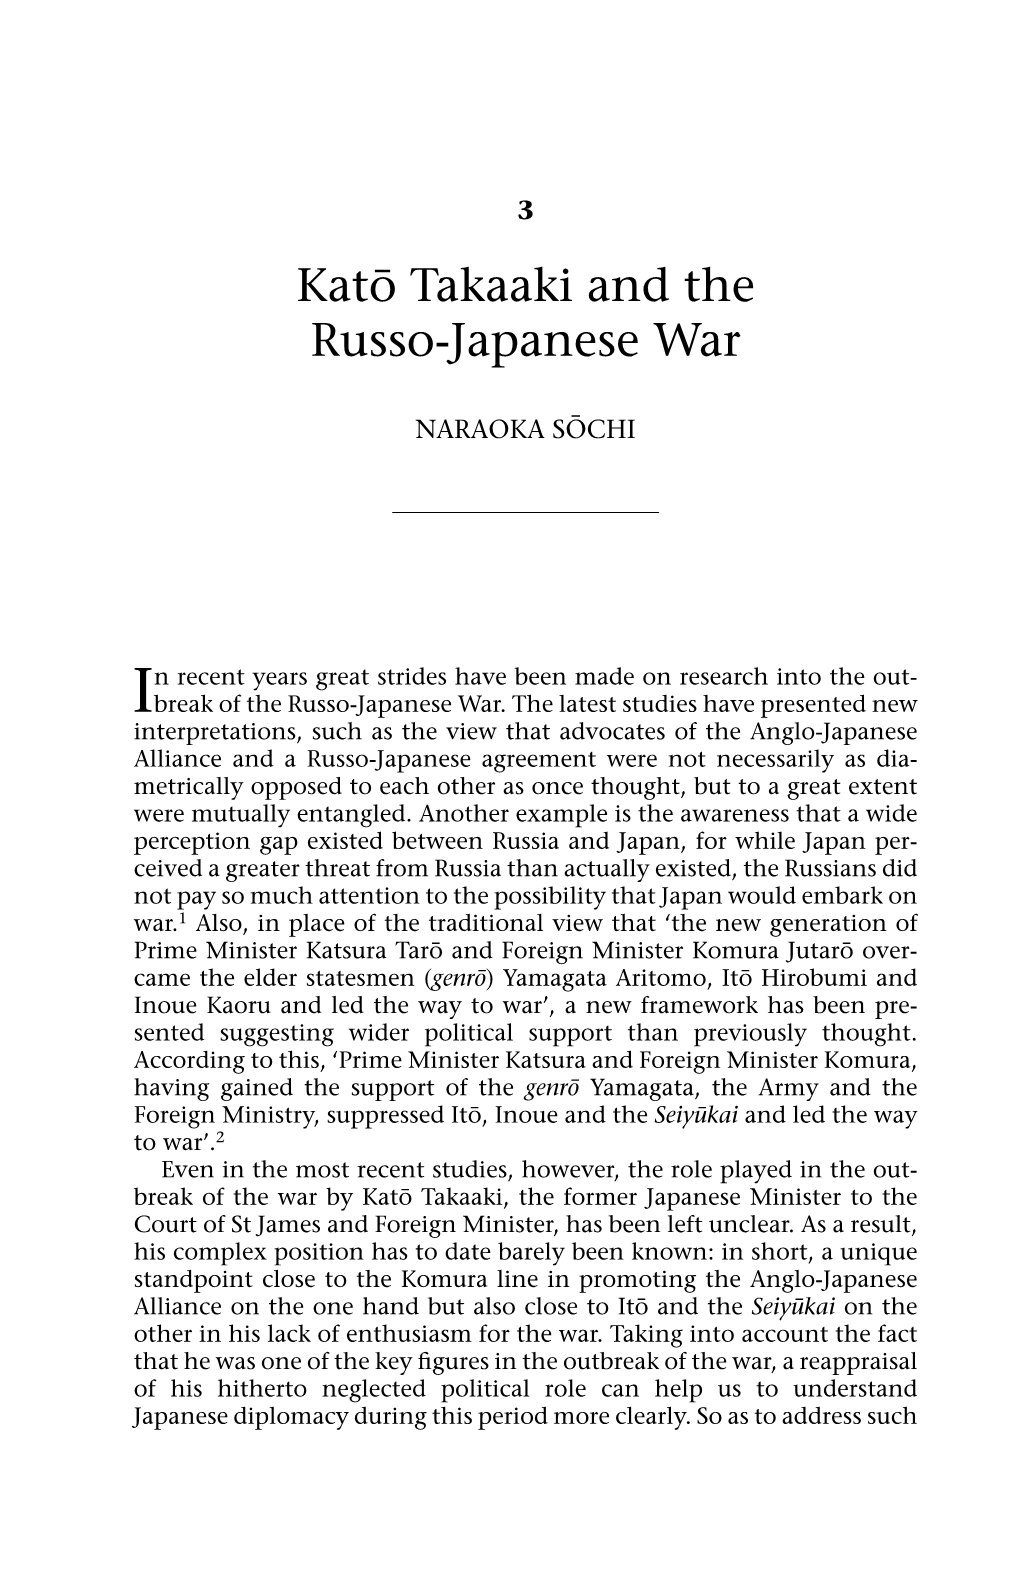 Kato Takaaki and the Russo-Japanese War